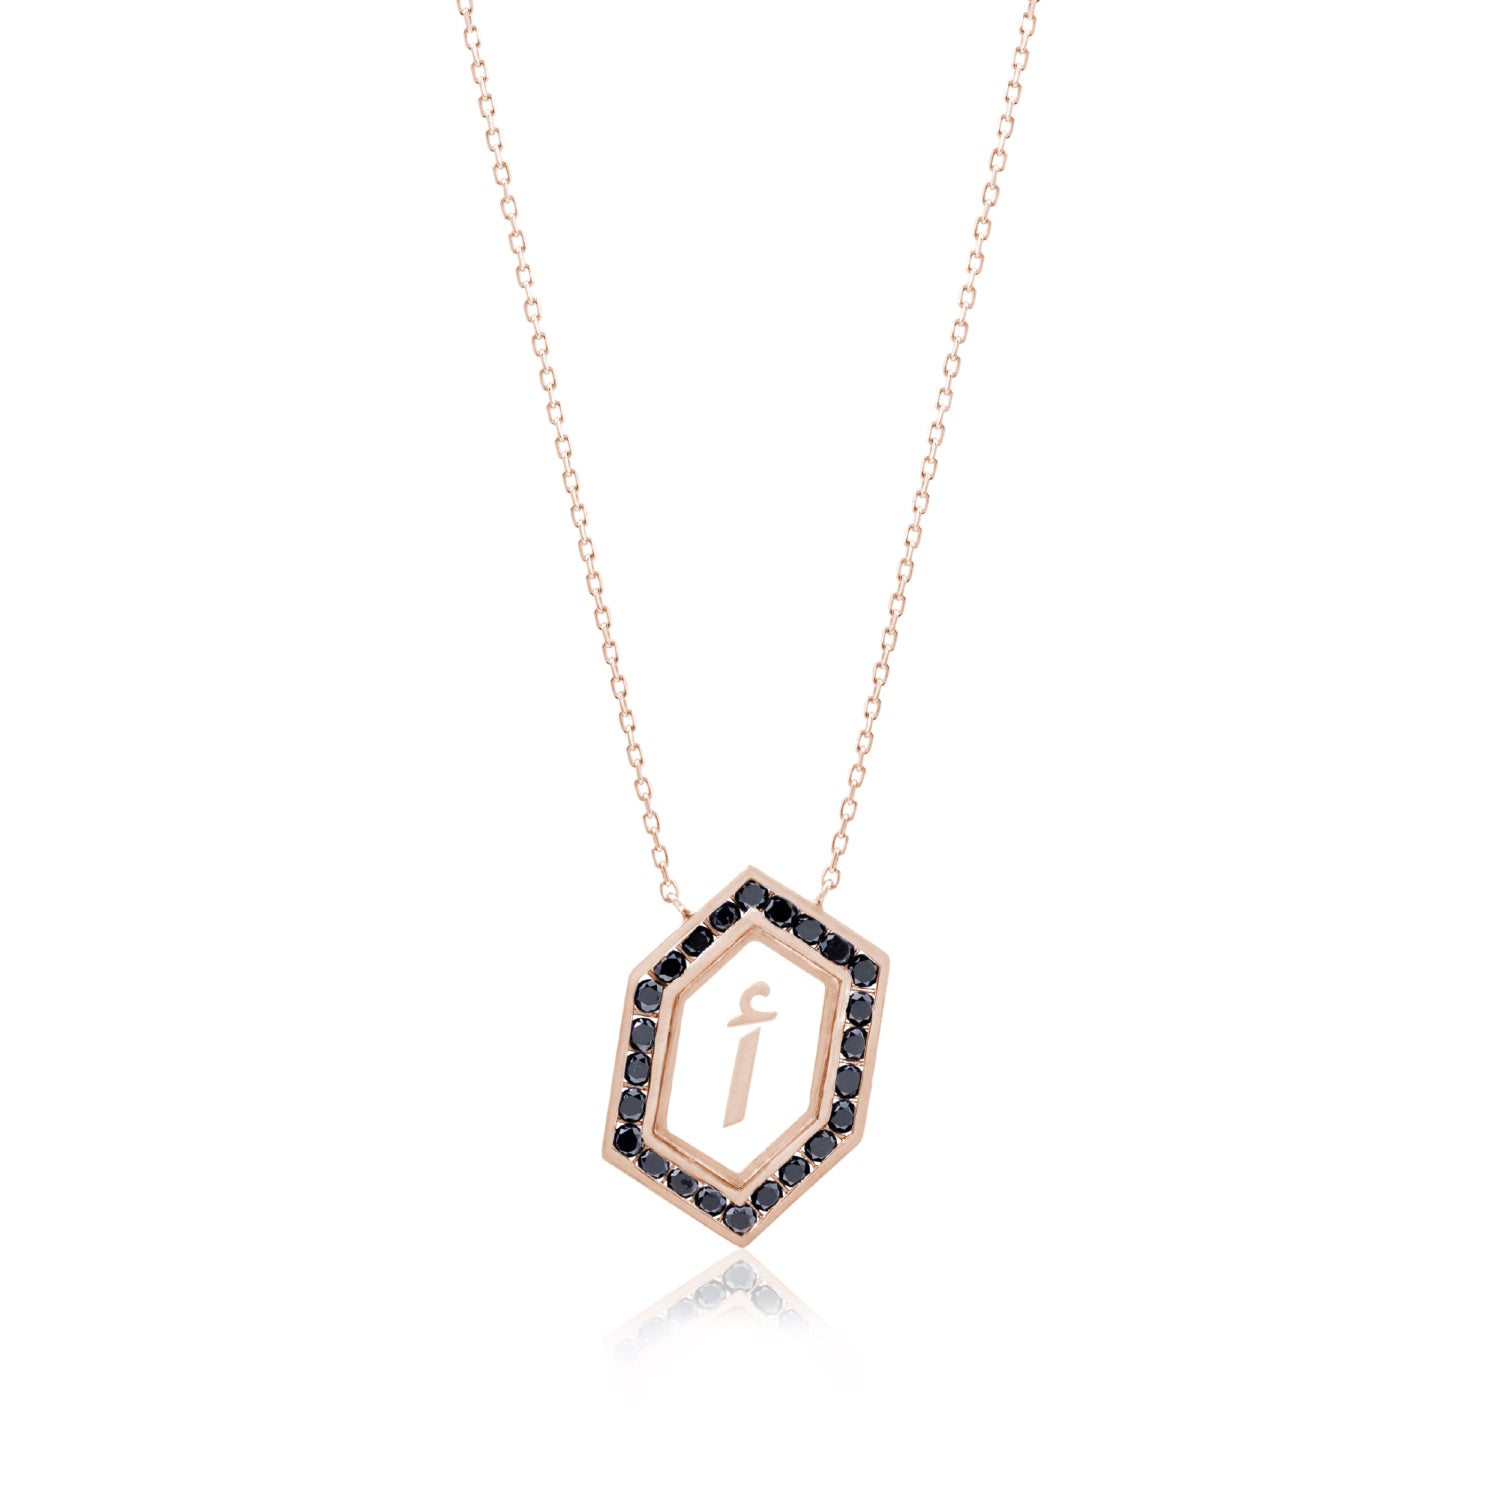 Qamoos 1.0 Letter أ Black Diamond Necklace in Rose Gold